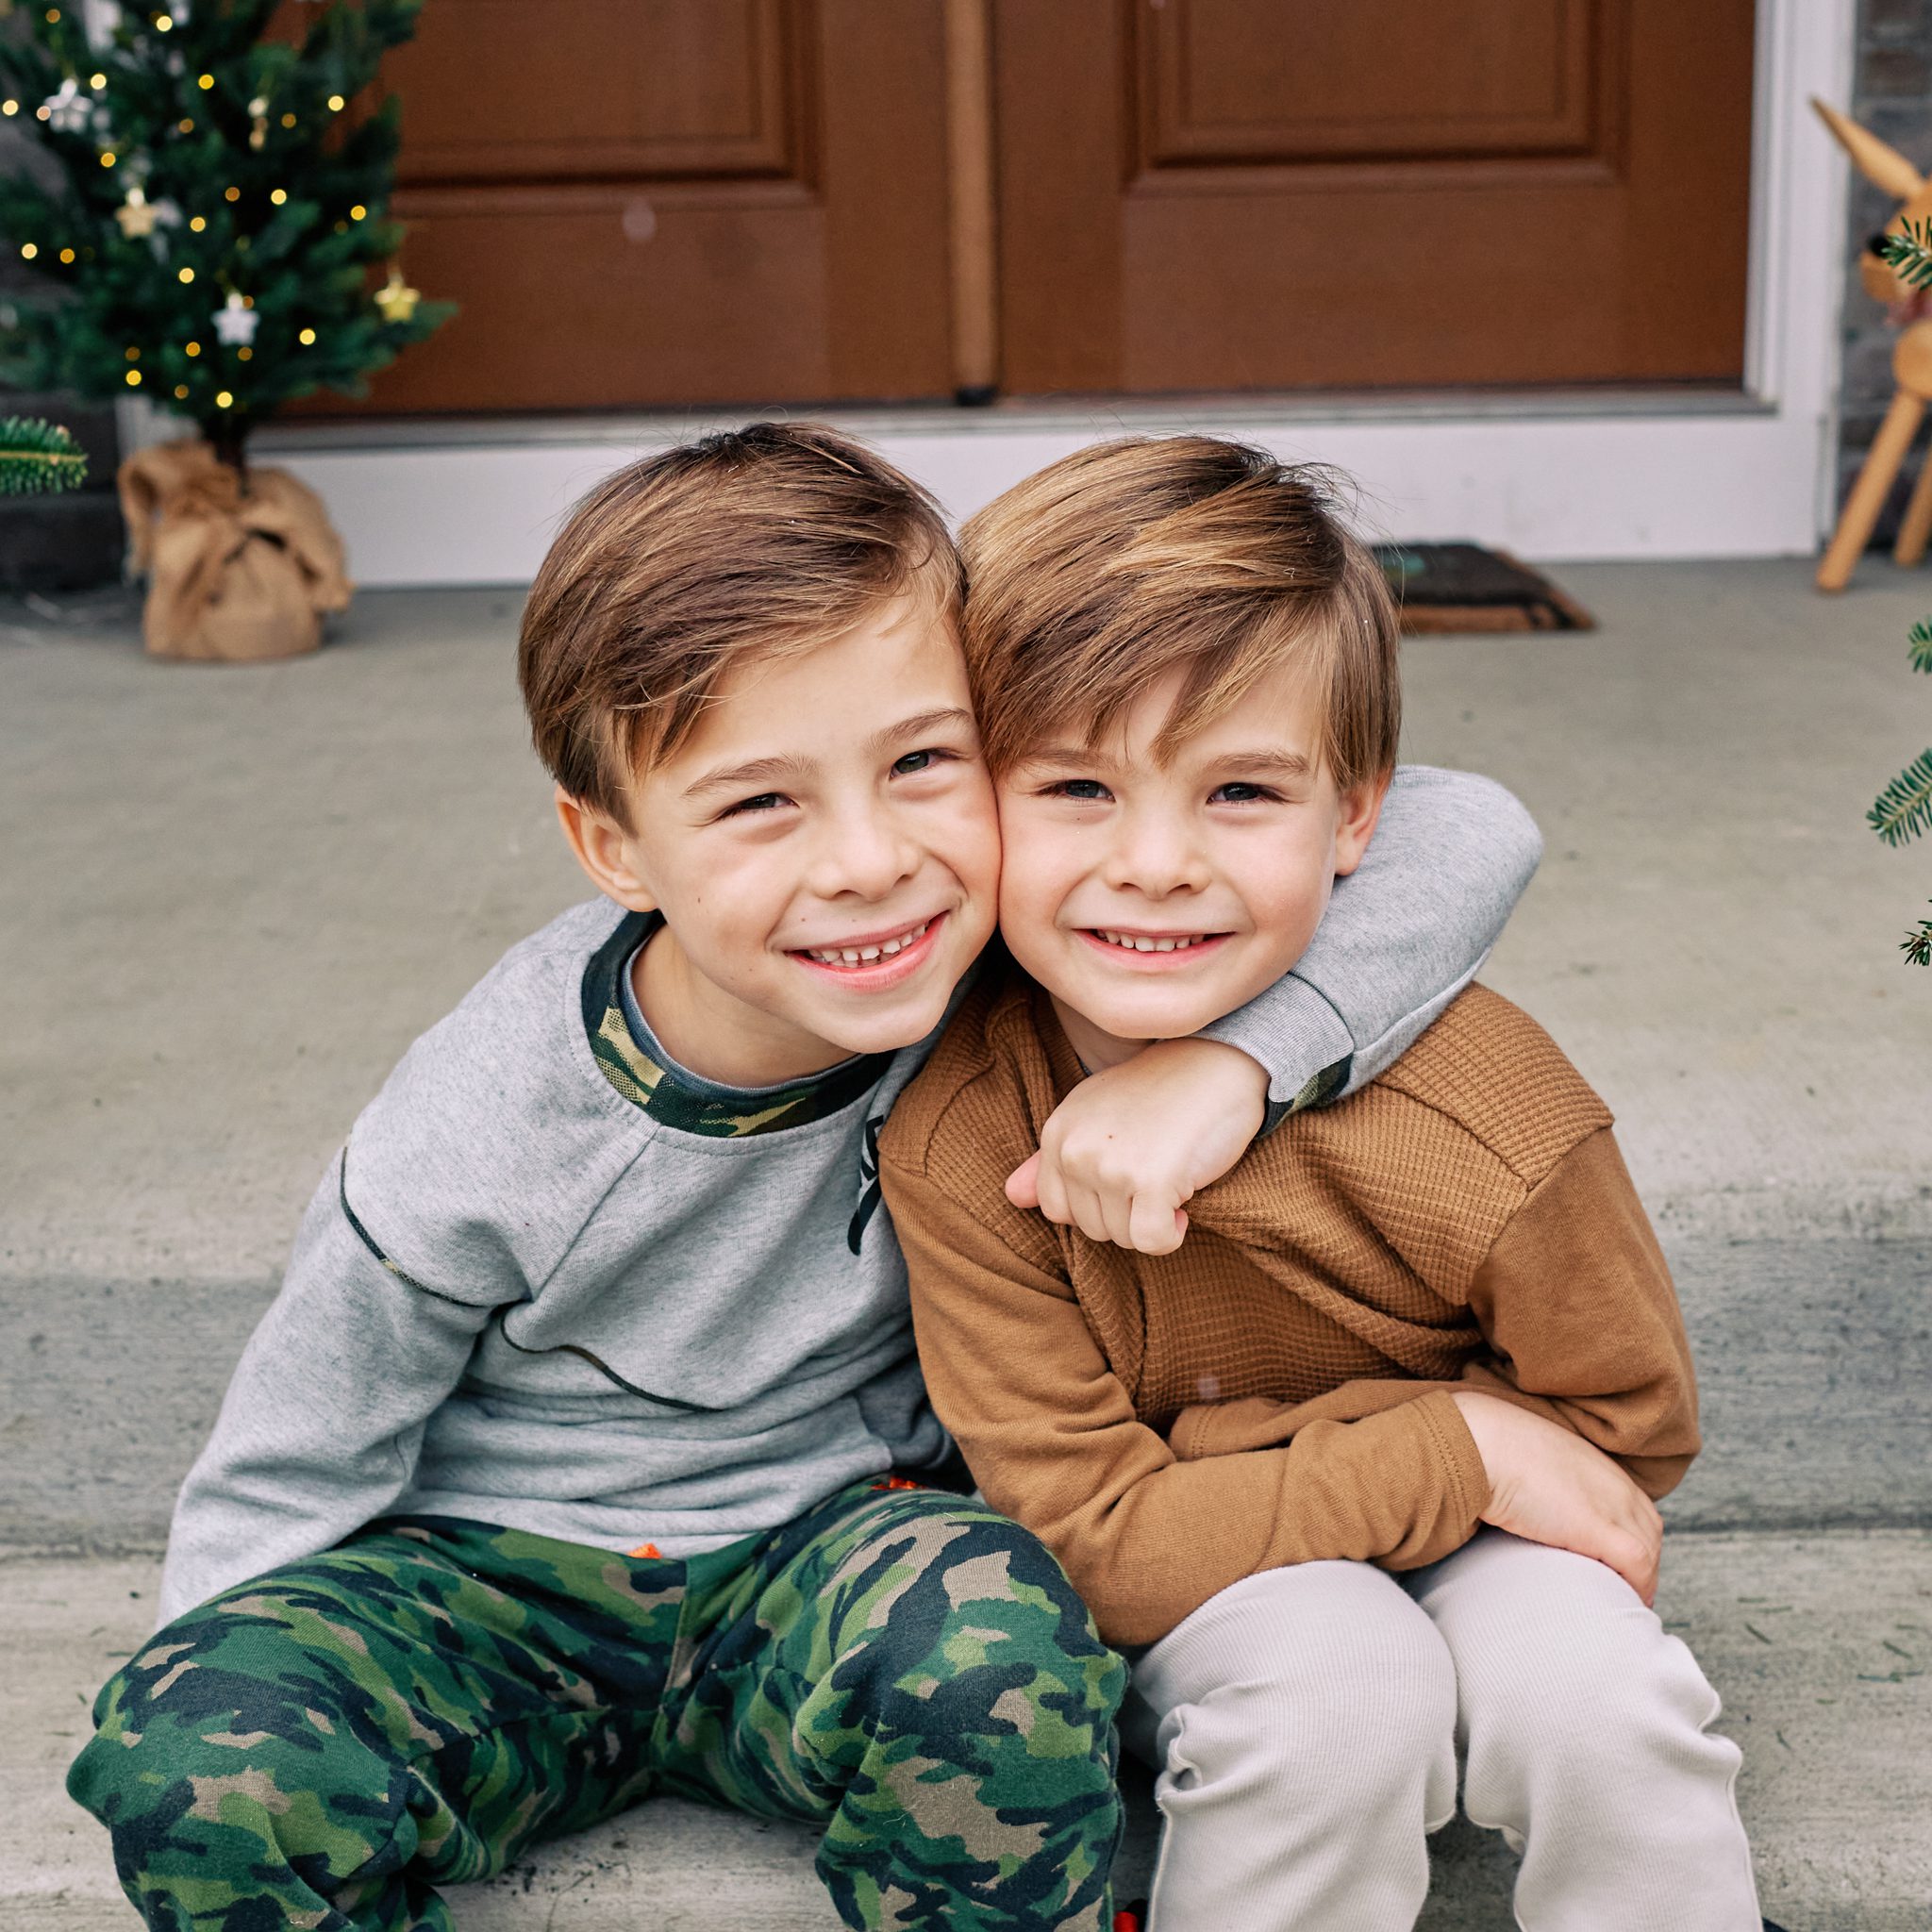 two brother embracing and sitting on front porch steps together looking at the camera